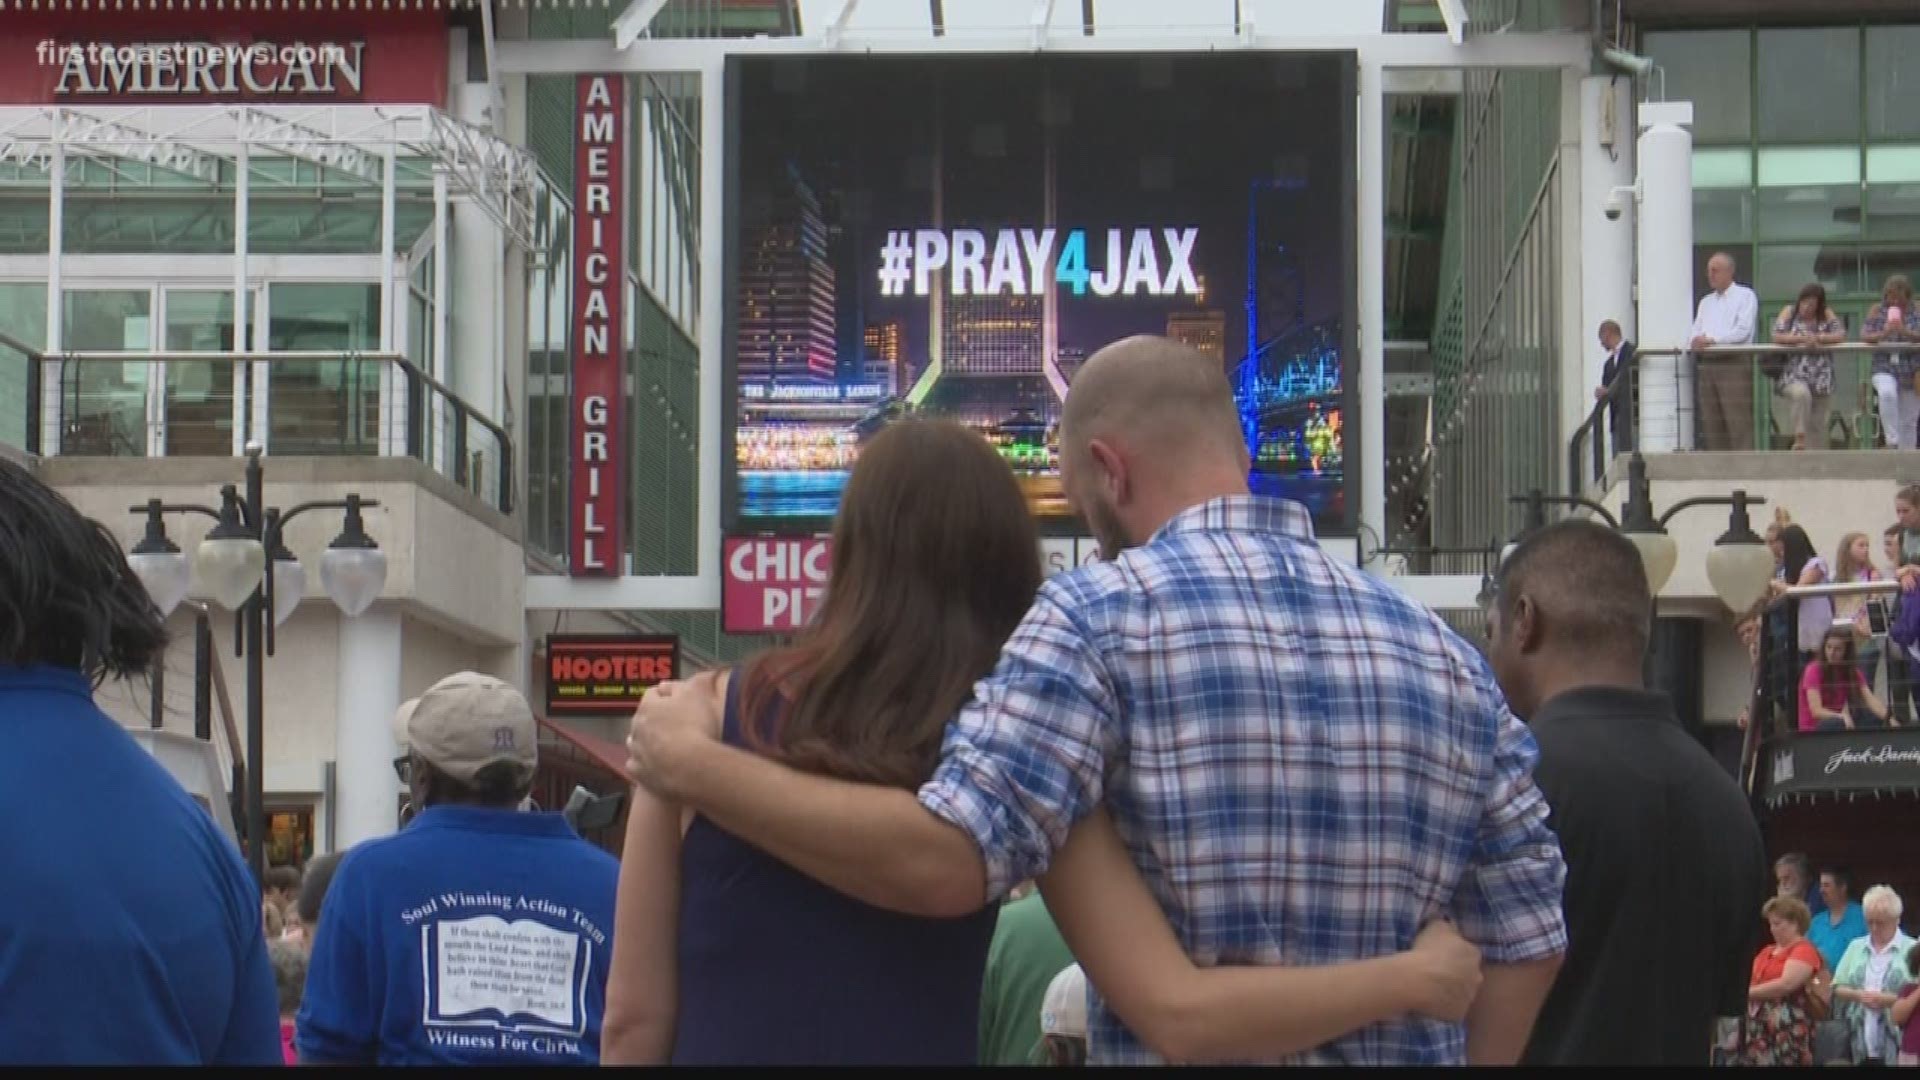 First Baptist Church invited the community to the Jacksonville Landing where they held a prayer service.